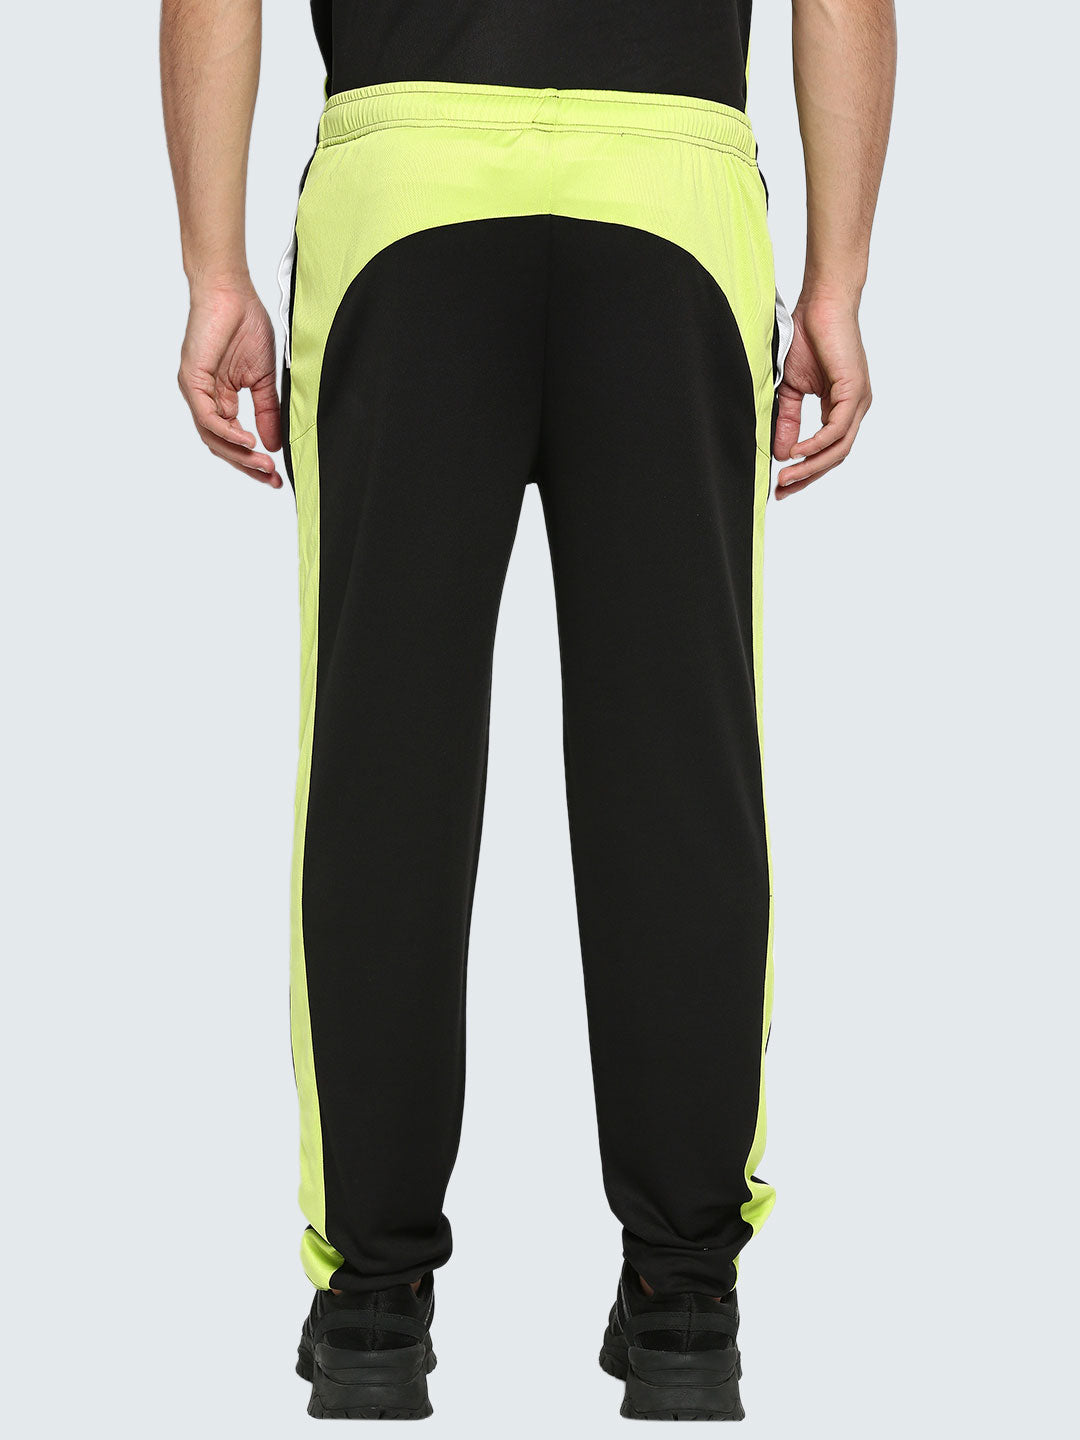 ADIDAS ORIGINALS Striped Women Silver Track Pants - Buy ADIDAS ORIGINALS  Striped Women Silver Track Pants Online at Best Prices in India |  Flipkart.com